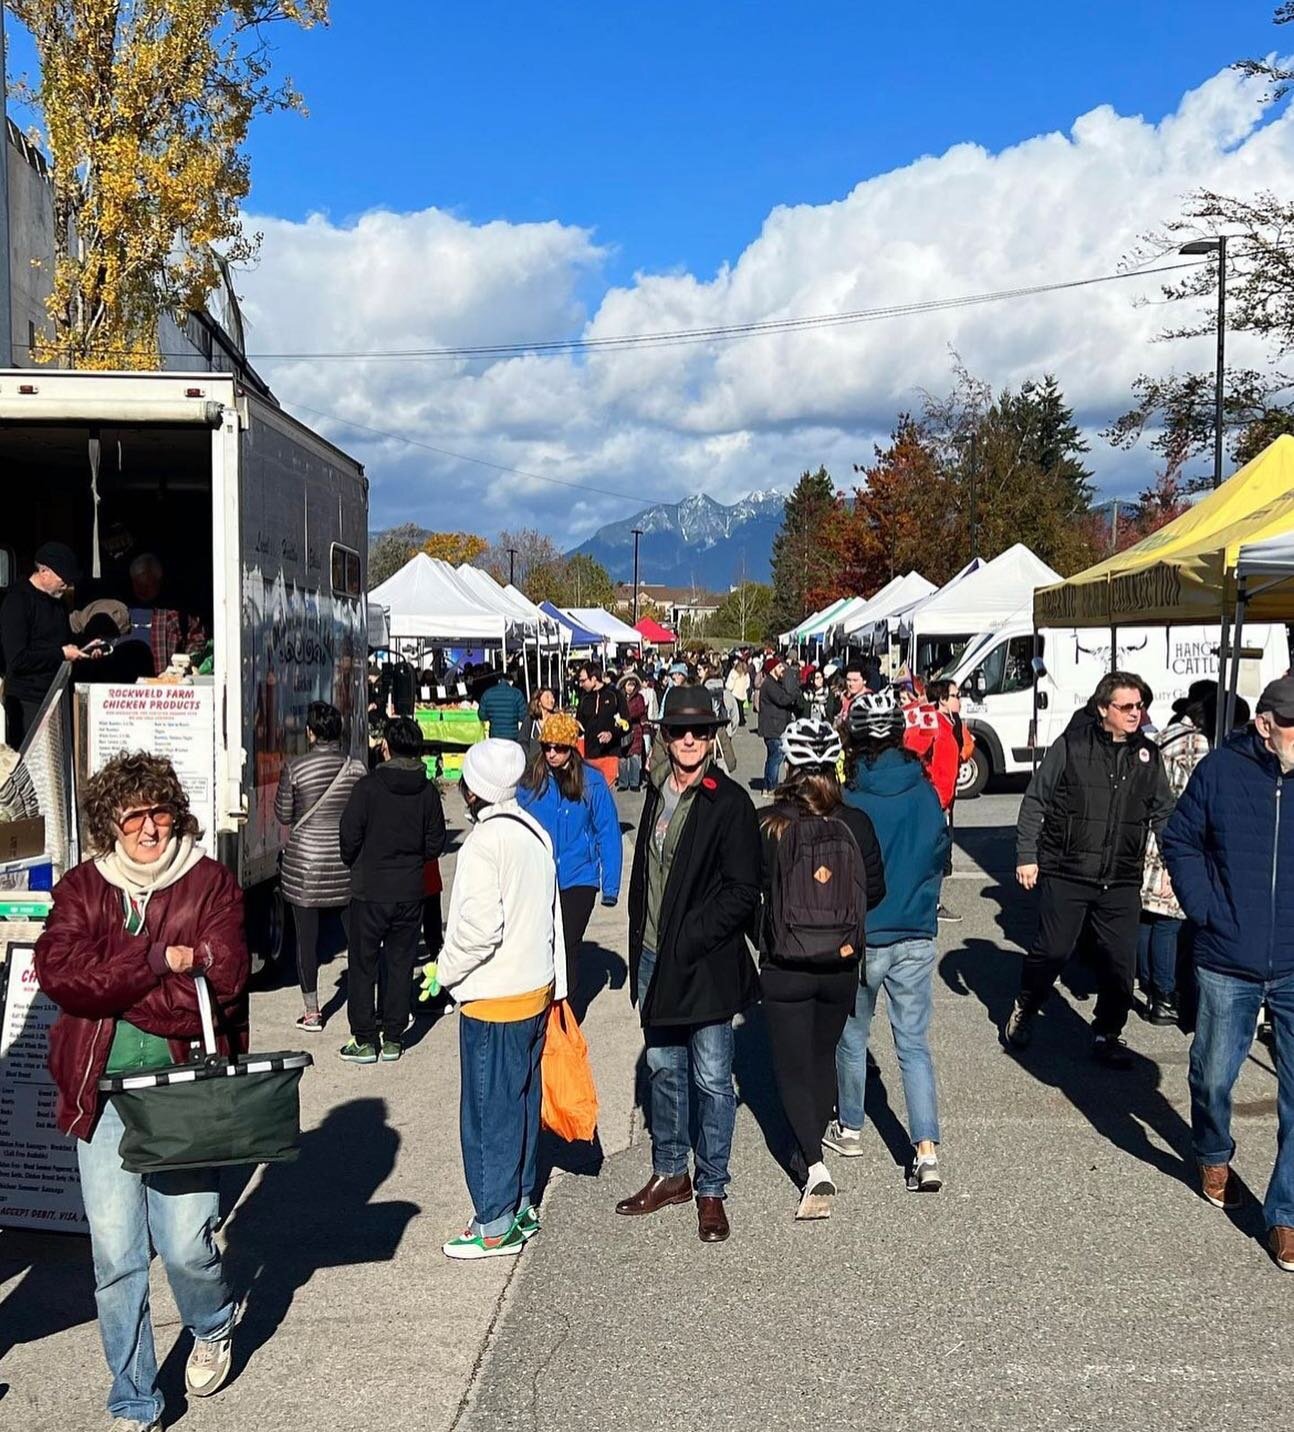 Winter @vanmarkets are on and we couldn&rsquo;t be more excited!

Visit our booth for a great selection of our products, including: beef cuts, meat pies, beef chili, hotdogs, farmers sausage, European wieners, pepperoni, farmeroni (mild pepperoni), b